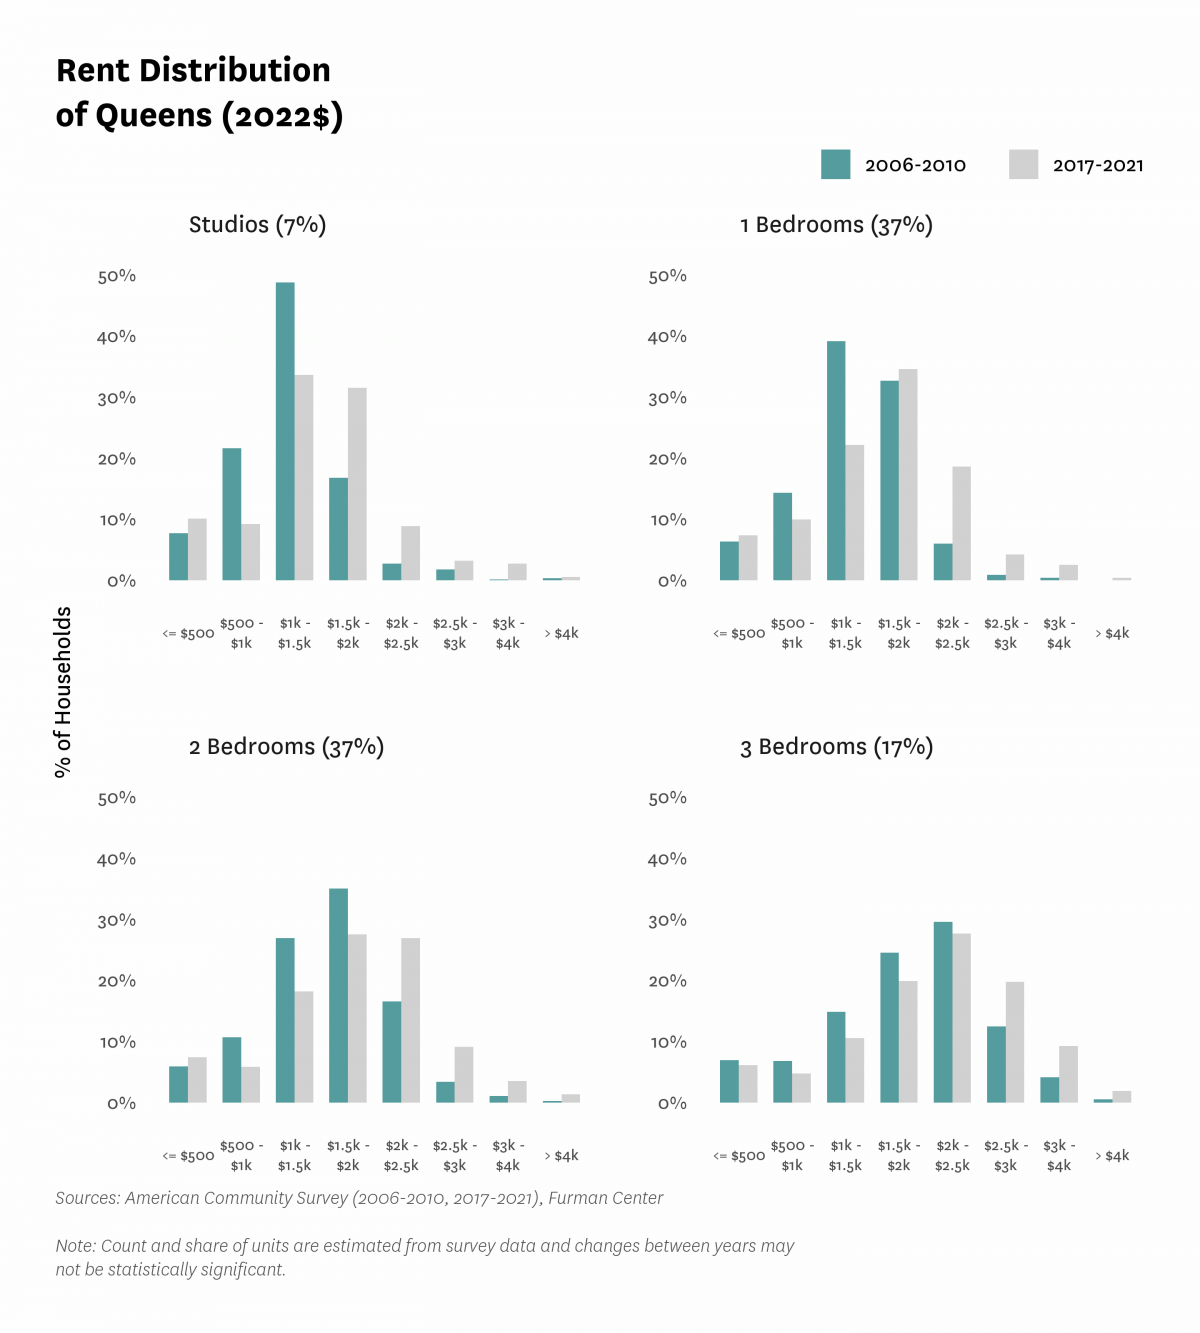 Graph showing the distribution of rents in Queens in both 2010 and 2017-2021.